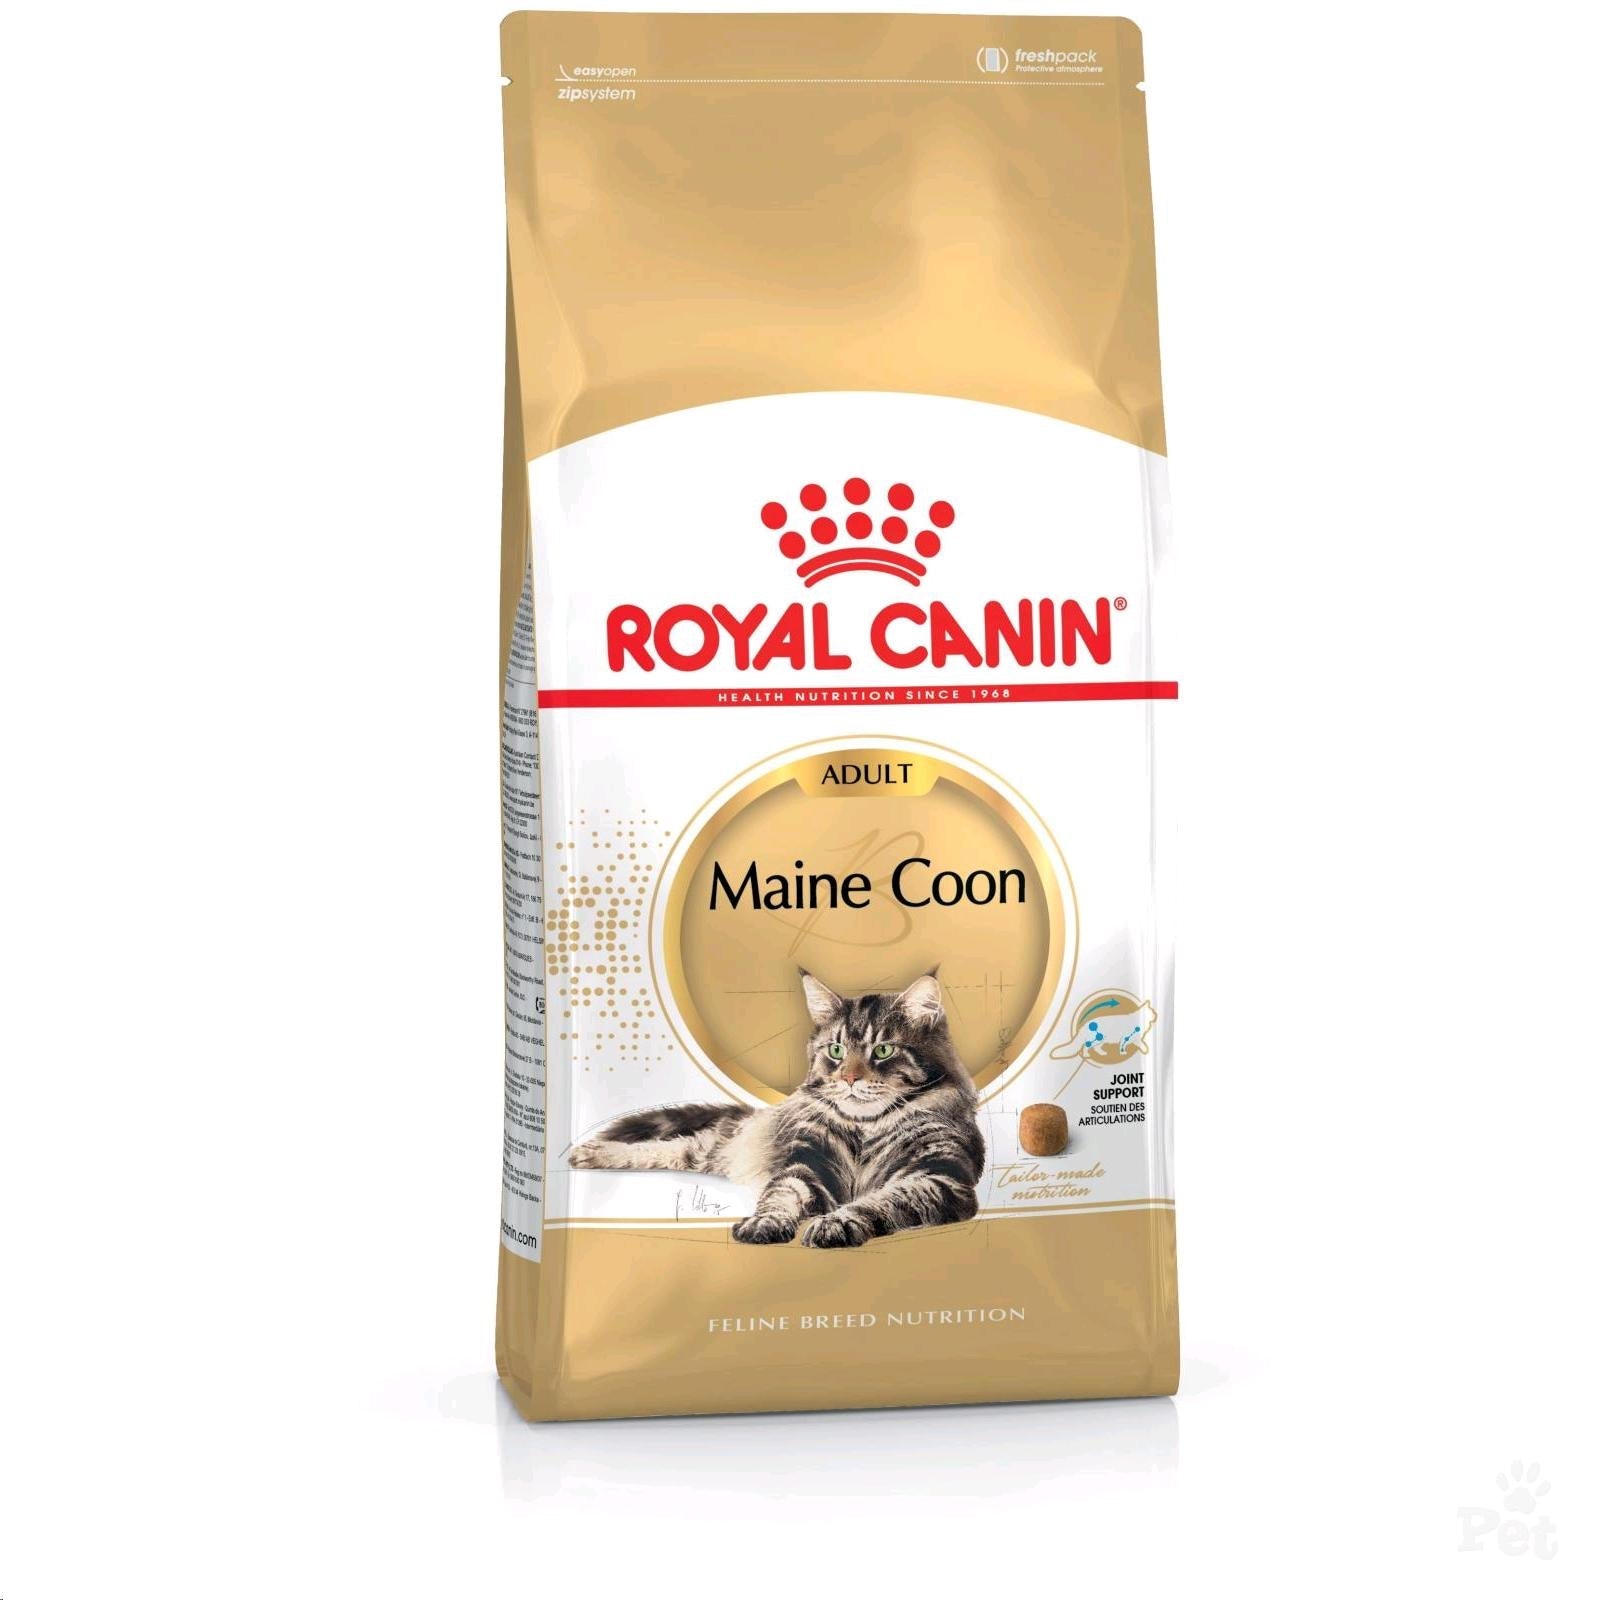 ROYAL CANIN MAINE COON 31 - Todoanimal.es